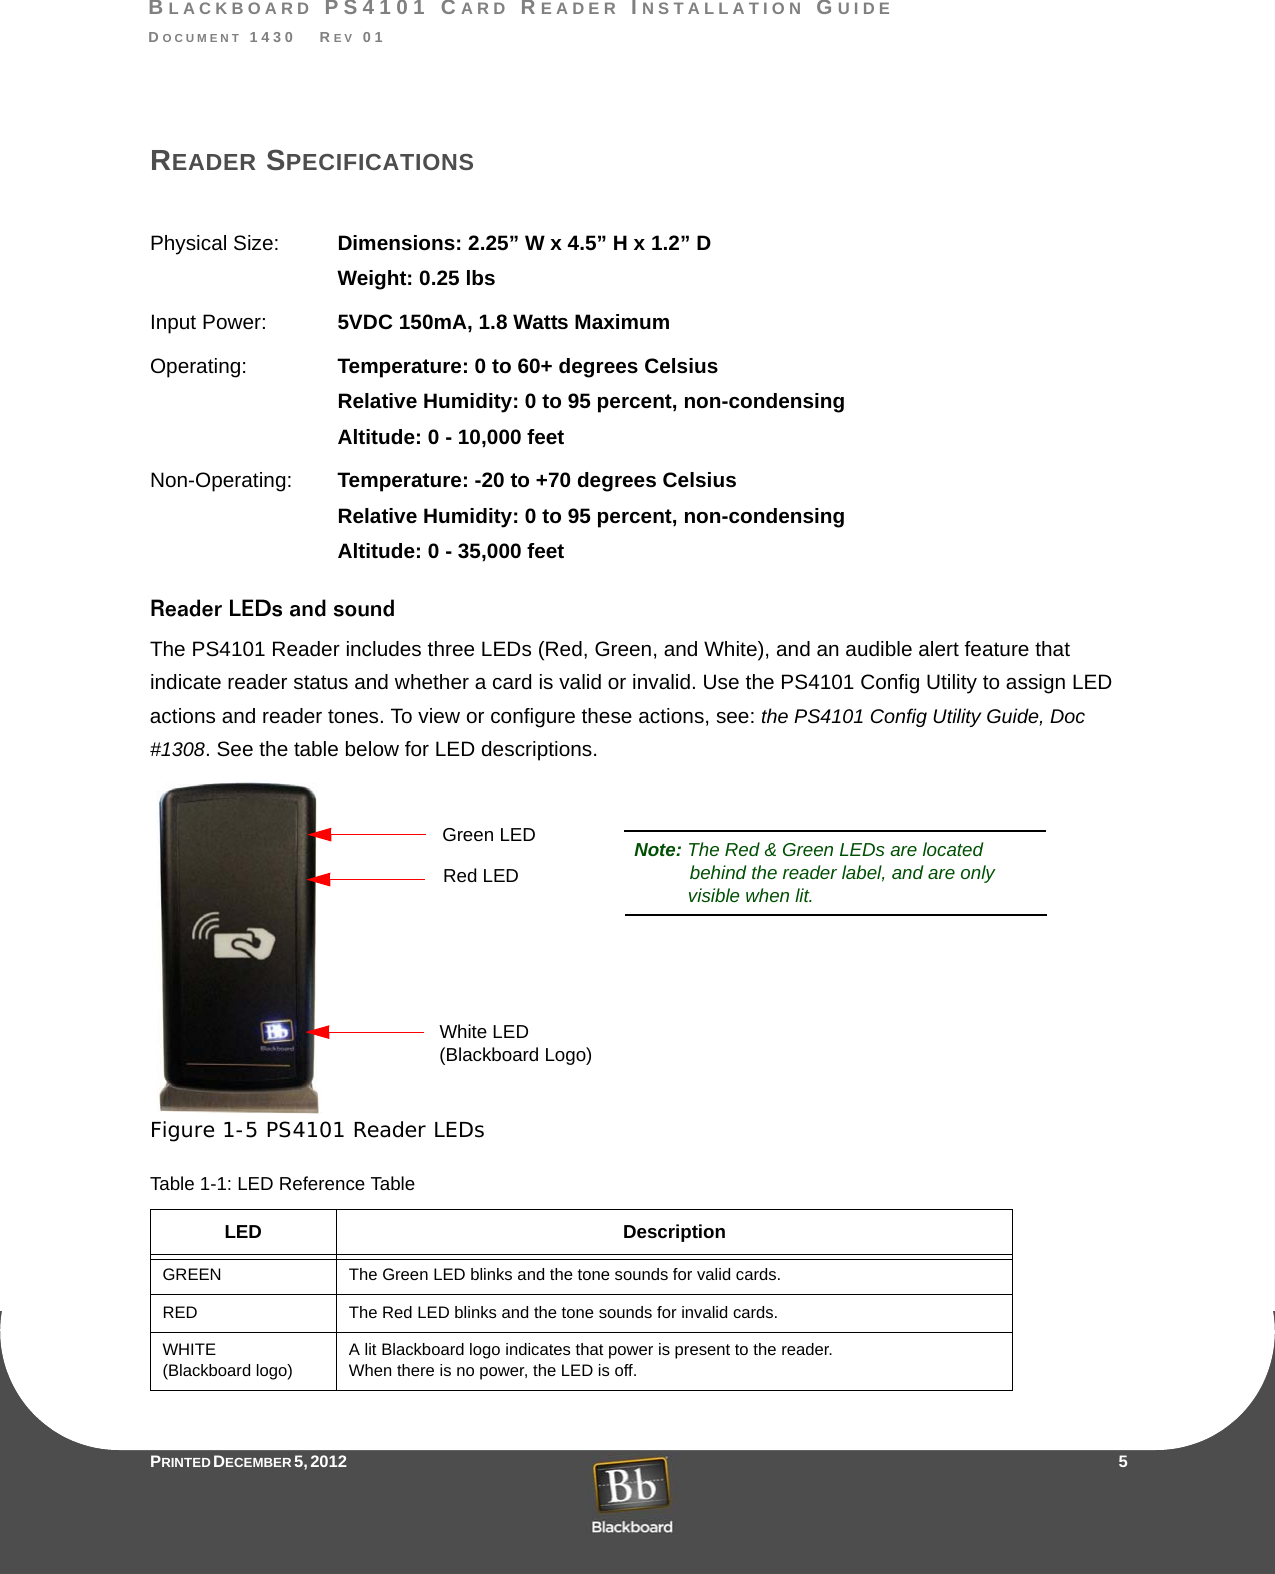 BLACKBOARD PS4101 CARD READER INSTALLATION GUIDEDOCUMENT 1430   REV 01PRINTED D ECEMBER 5, 2012                    5READER SPECIFICATIONSPhysical Size: Dimensions: 2.25” W x 4.5” H x 1.2” DWeight: 0.25 lbsInput Power: 5VDC 150mA, 1.8 Watts MaximumOperating: Temperature: 0 to 60+ degrees CelsiusRelative Humidity: 0 to 95 percent, non-condensingAltitude: 0 - 10,000 feetNon-Operating: Temperature: -20 to +70 degrees CelsiusRelative Humidity: 0 to 95 percent, non-condensingAltitude: 0 - 35,000 feetReader LEDs and soundThe PS4101 Reader includes three LEDs (Red, Green, and White), and an audible alert feature that indicate reader status and whether a card is valid or invalid. Use the PS4101 Config Utility to assign LED actions and reader tones. To view or configure these actions, see: the PS4101 Config Utility Guide, Doc #1308. See the table below for LED descriptions.Figure 1-5 PS4101 Reader LEDsTable 1-1: LED Reference TableLED DescriptionGREEN The Green LED blinks and the tone sounds for valid cards.RED The Red LED blinks and the tone sounds for invalid cards.WHITE  (Blackboard logo)A lit Blackboard logo indicates that power is present to the reader. When there is no power, the LED is off.White LED Green LEDRed LEDNote: The Red &amp; Green LEDs are located(Blackboard Logo)behind the reader label, and are onlyvisible when lit.